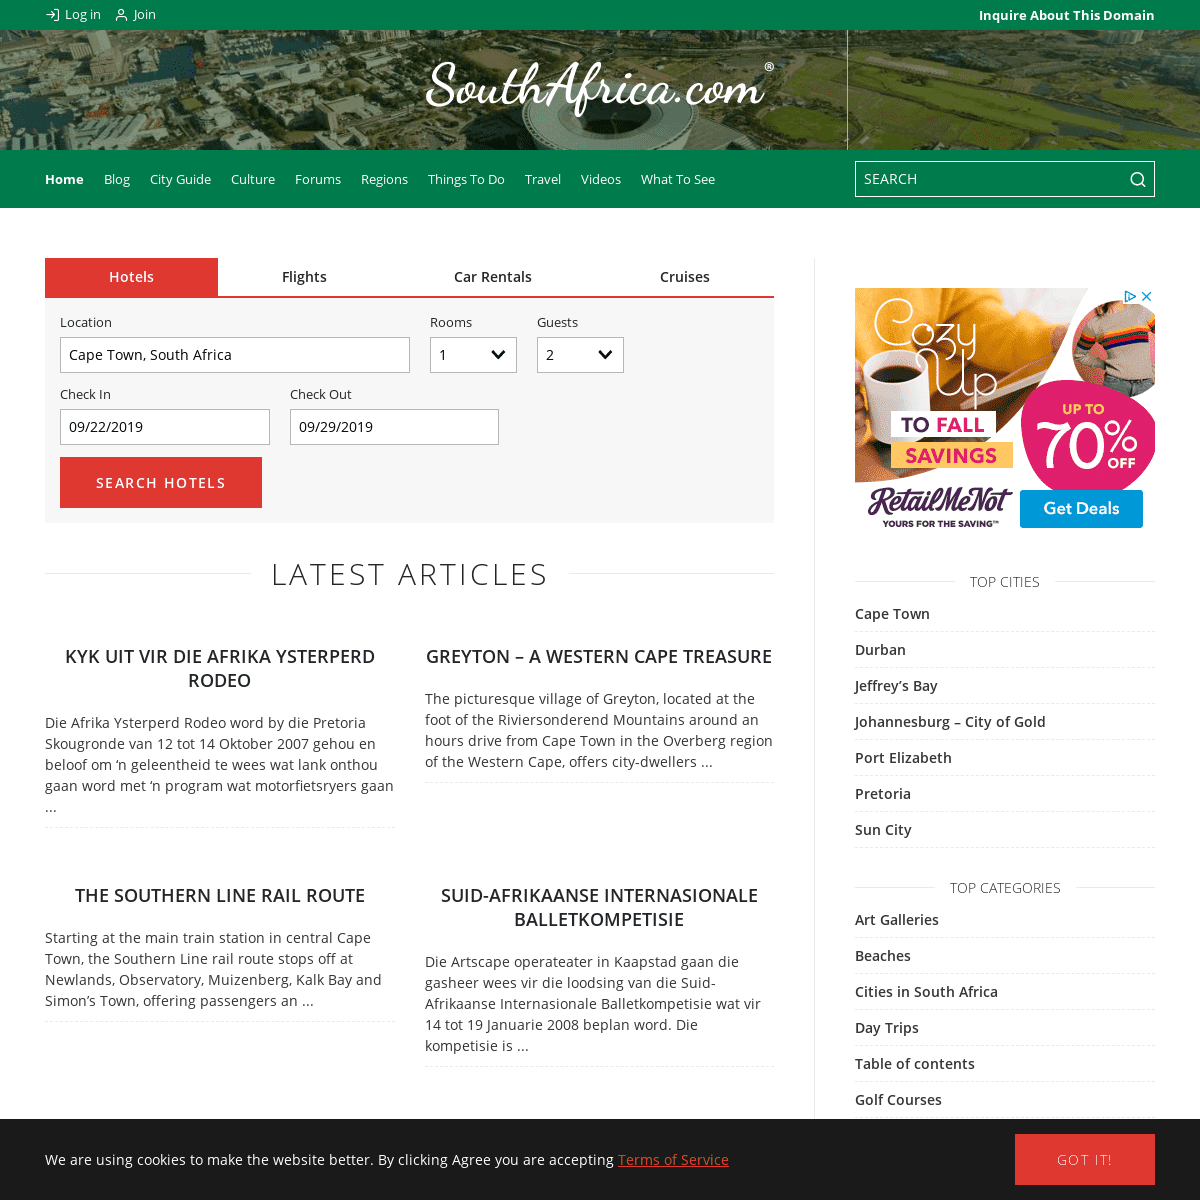 SouthAfrica.com - Hotel, Travel and Tour Guide